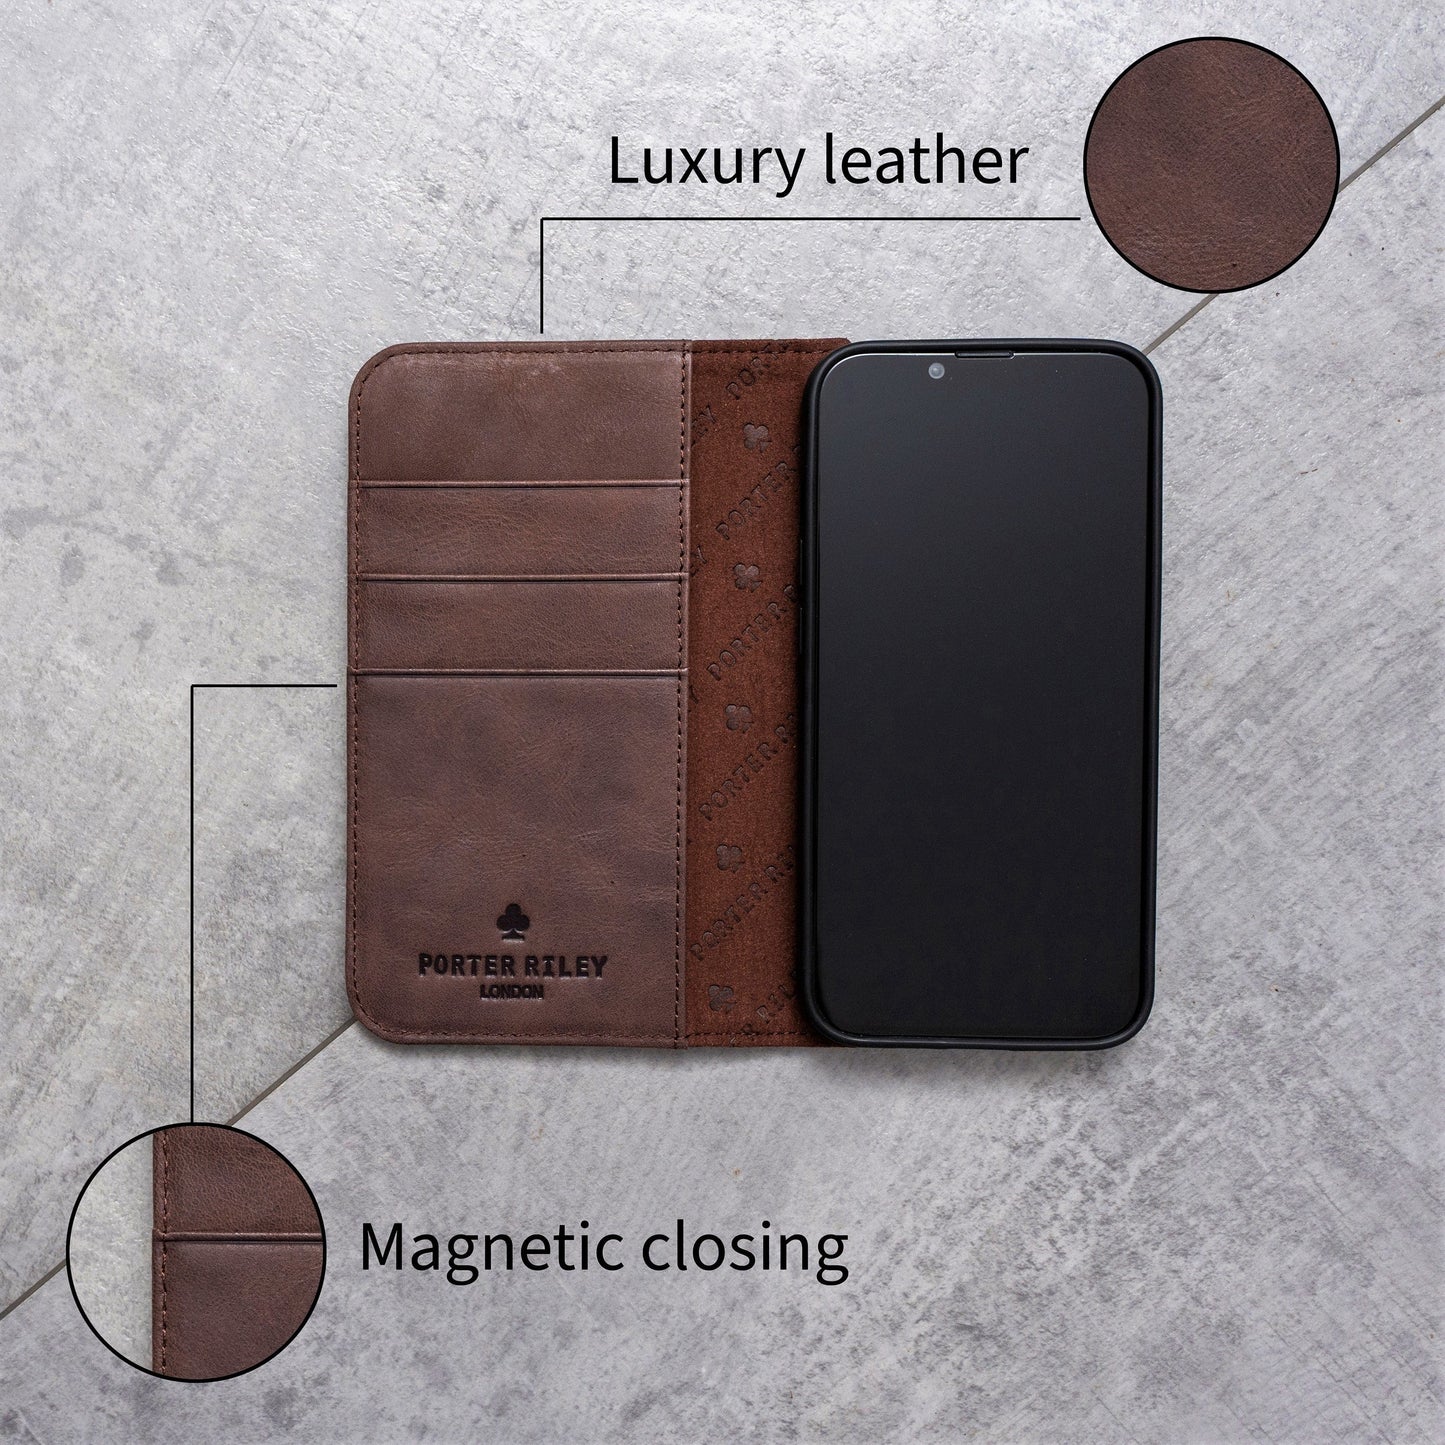 iPhone 11 Pro Leather Case. Premium Slim Genuine Leather Stand Case/Cover/Wallet (Chocolate Brown)